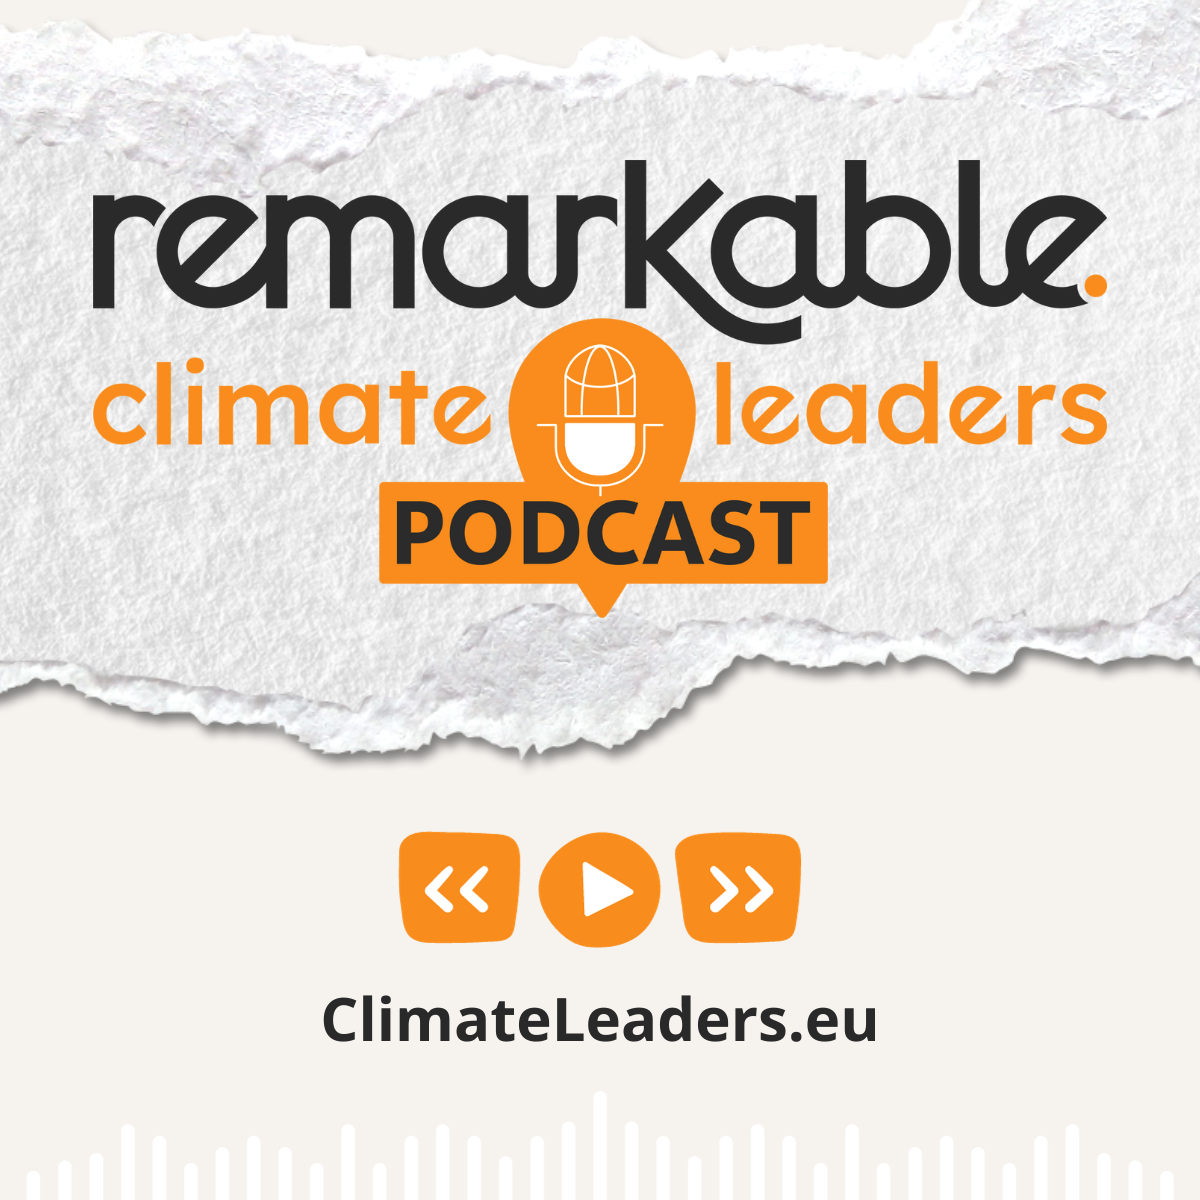 8 stories, 8 leaders: REMARKABLE podcast inspires climate leadership across Europe